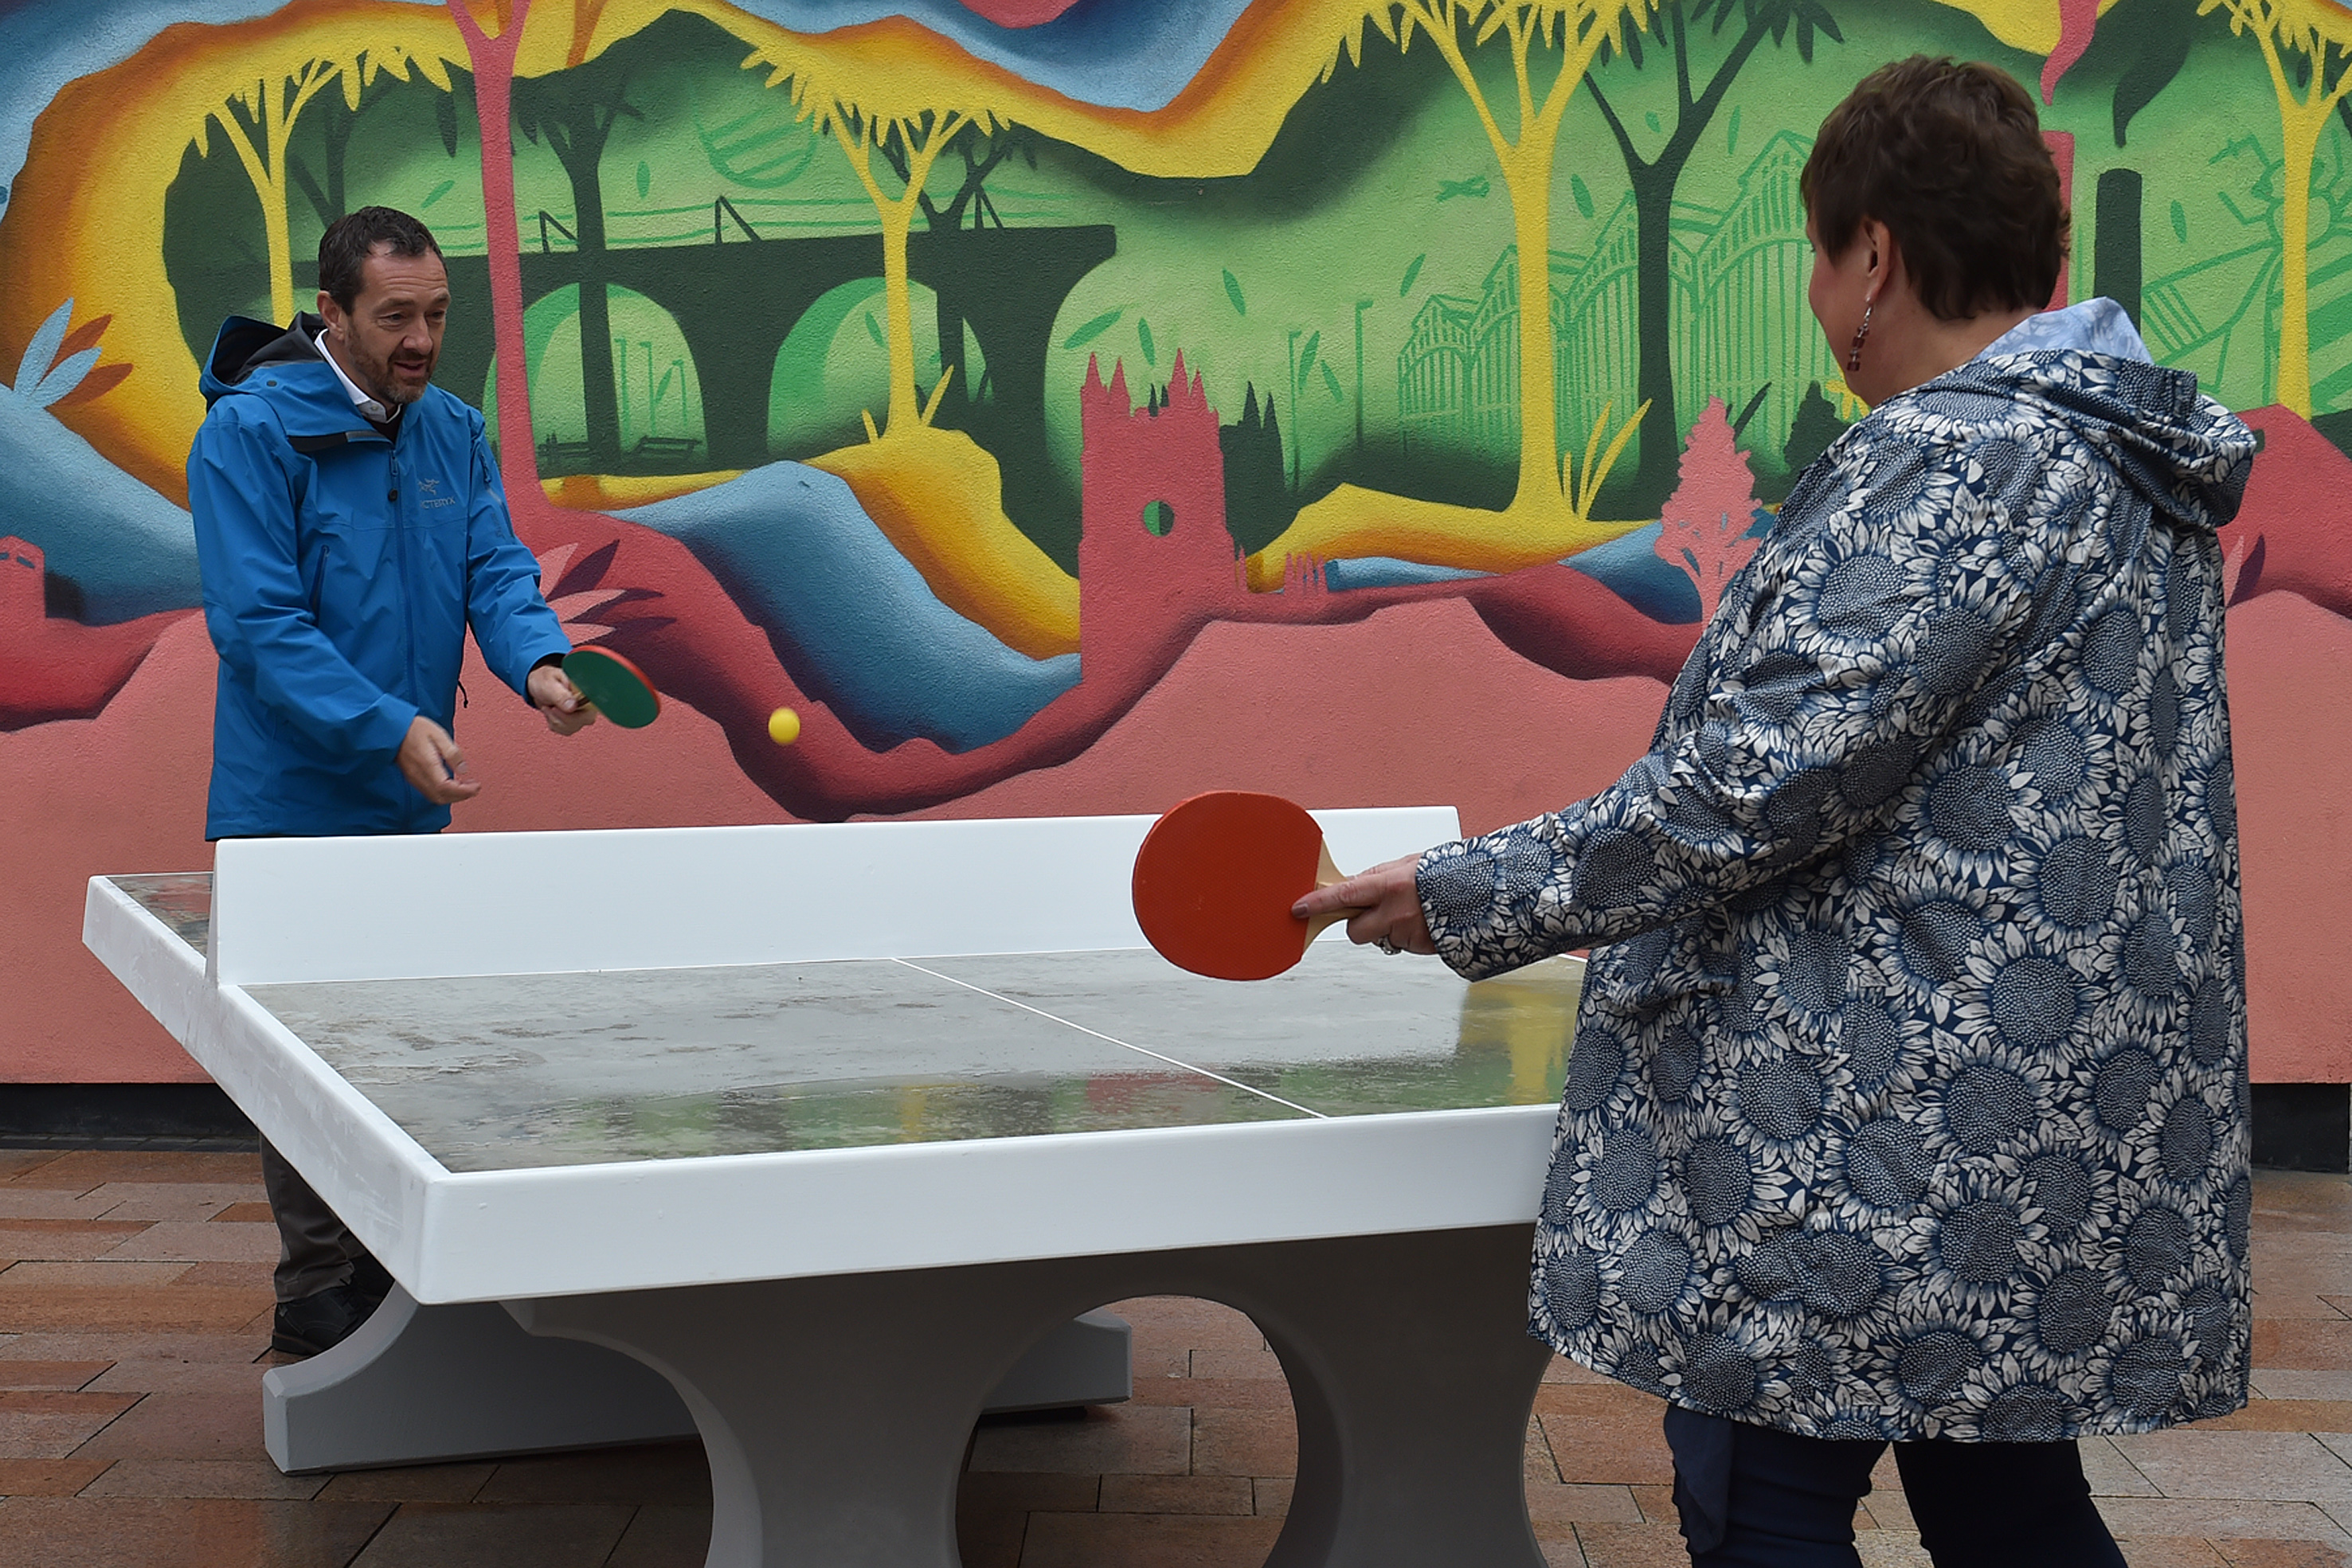 Chris Boardman and Councillor Jude Wells playing table tennis at Stockport parklet